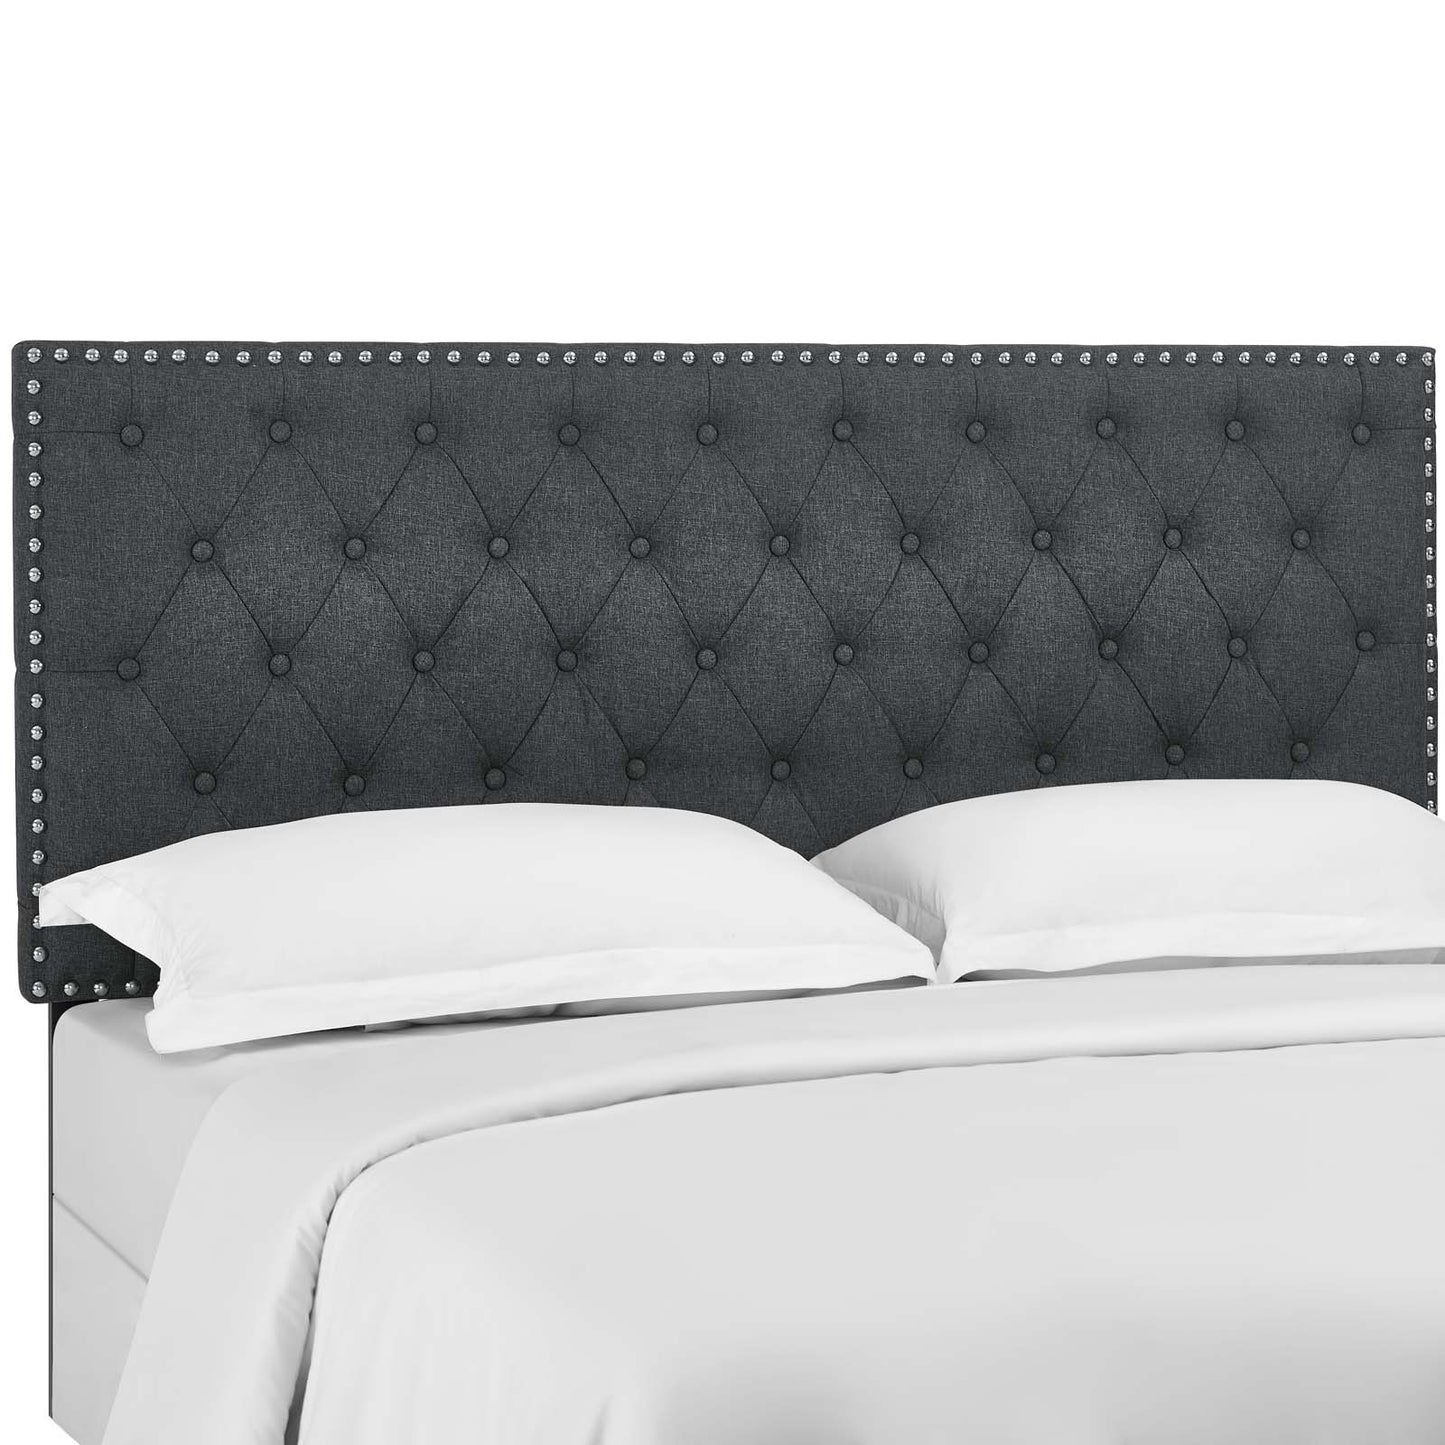 Helena Tufted Full / Queen Upholstered Linen Fabric Headboard Gray MOD-5860-GRY